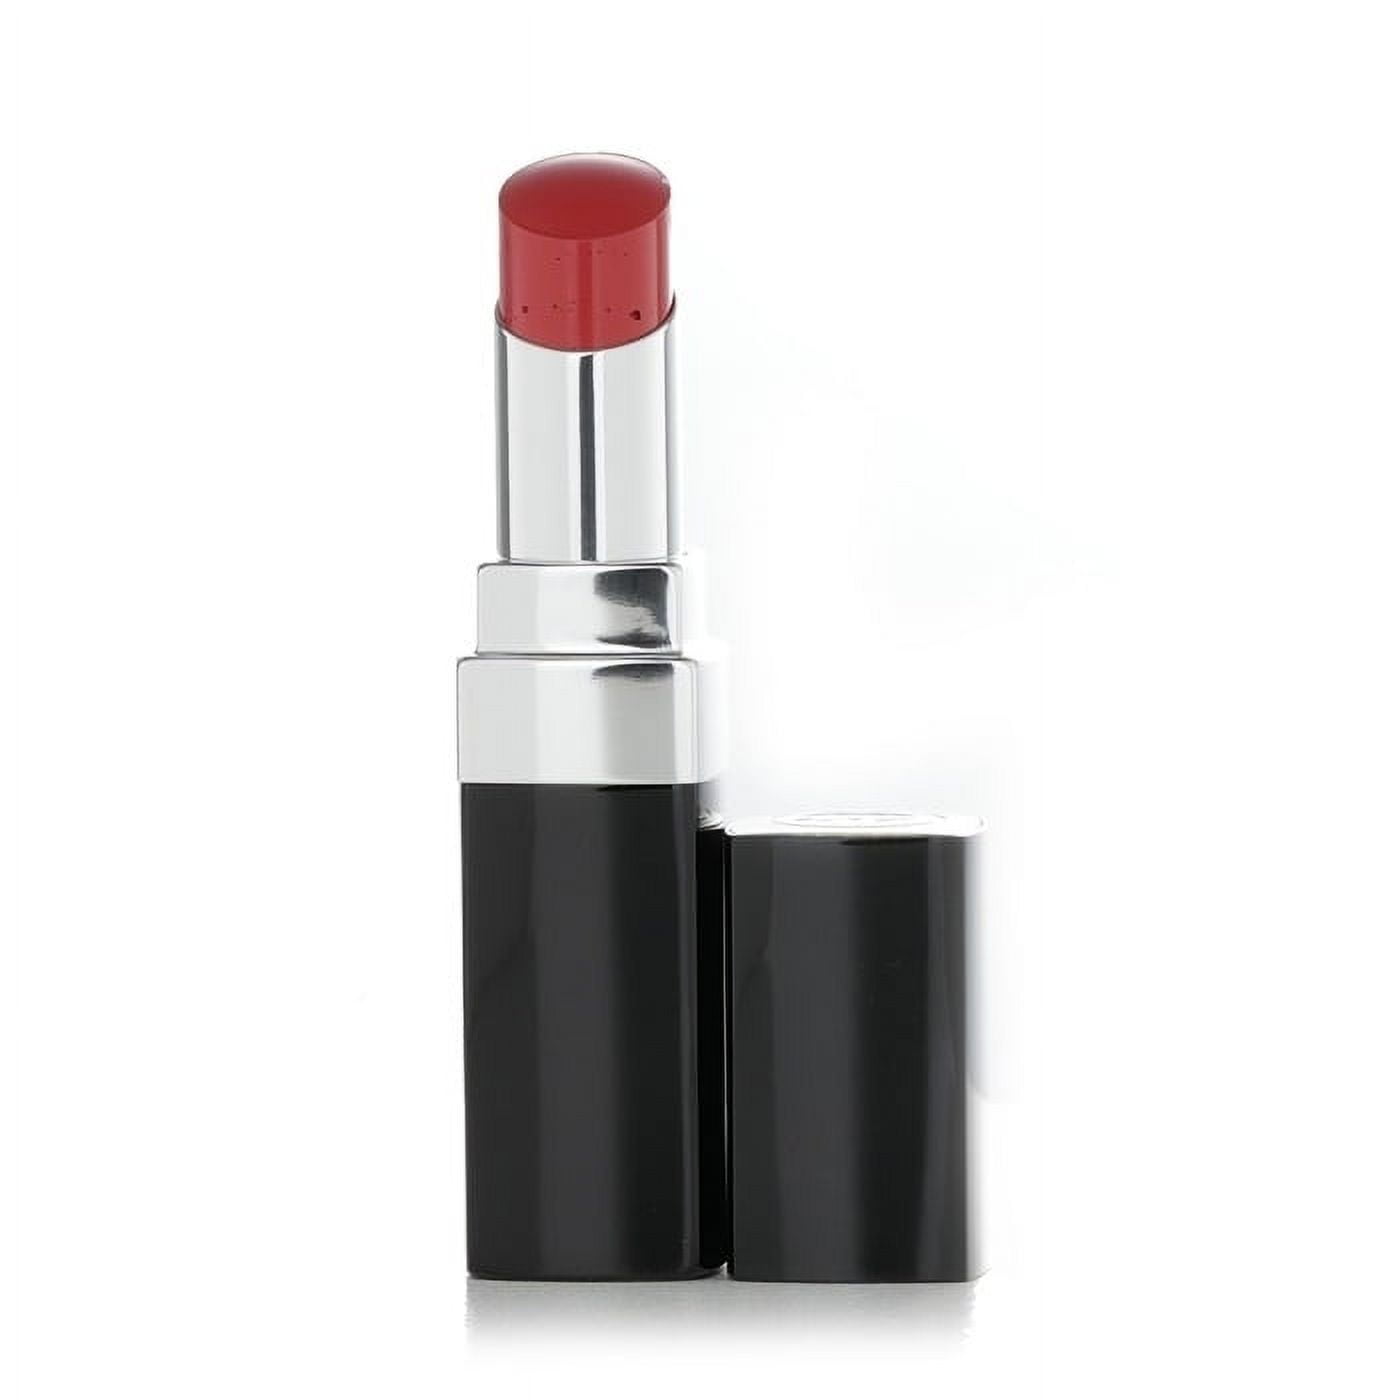 Chanel Rouge Coco Bloom kaufen » ab € 39,99